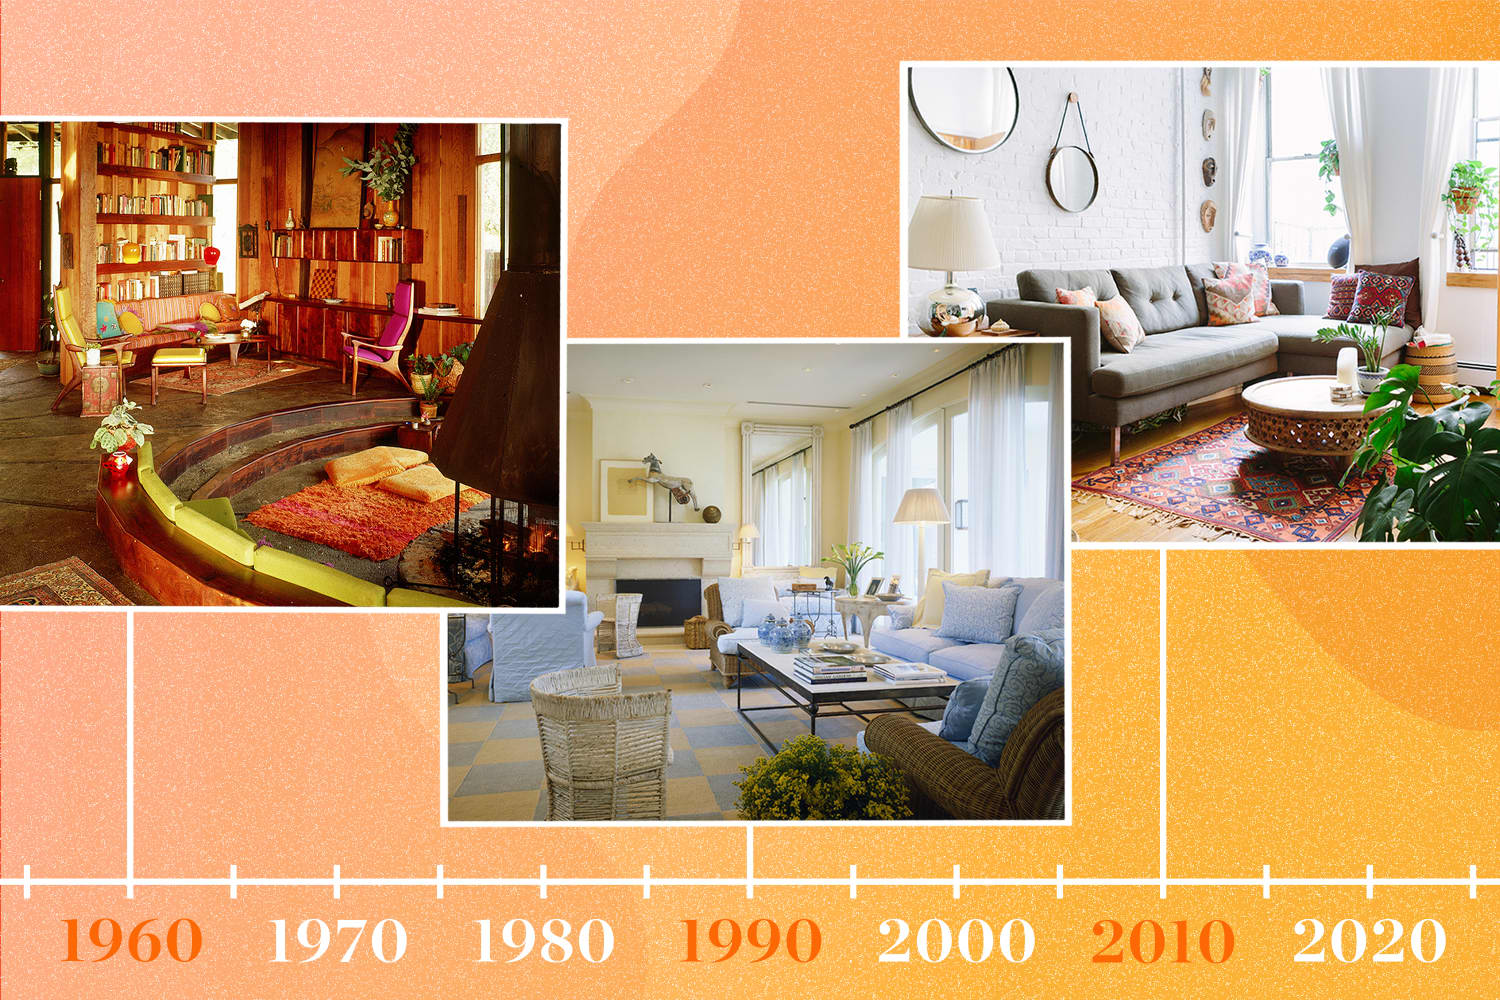 The Most Memorable Living Room Design Trends From the Past 50+ Years